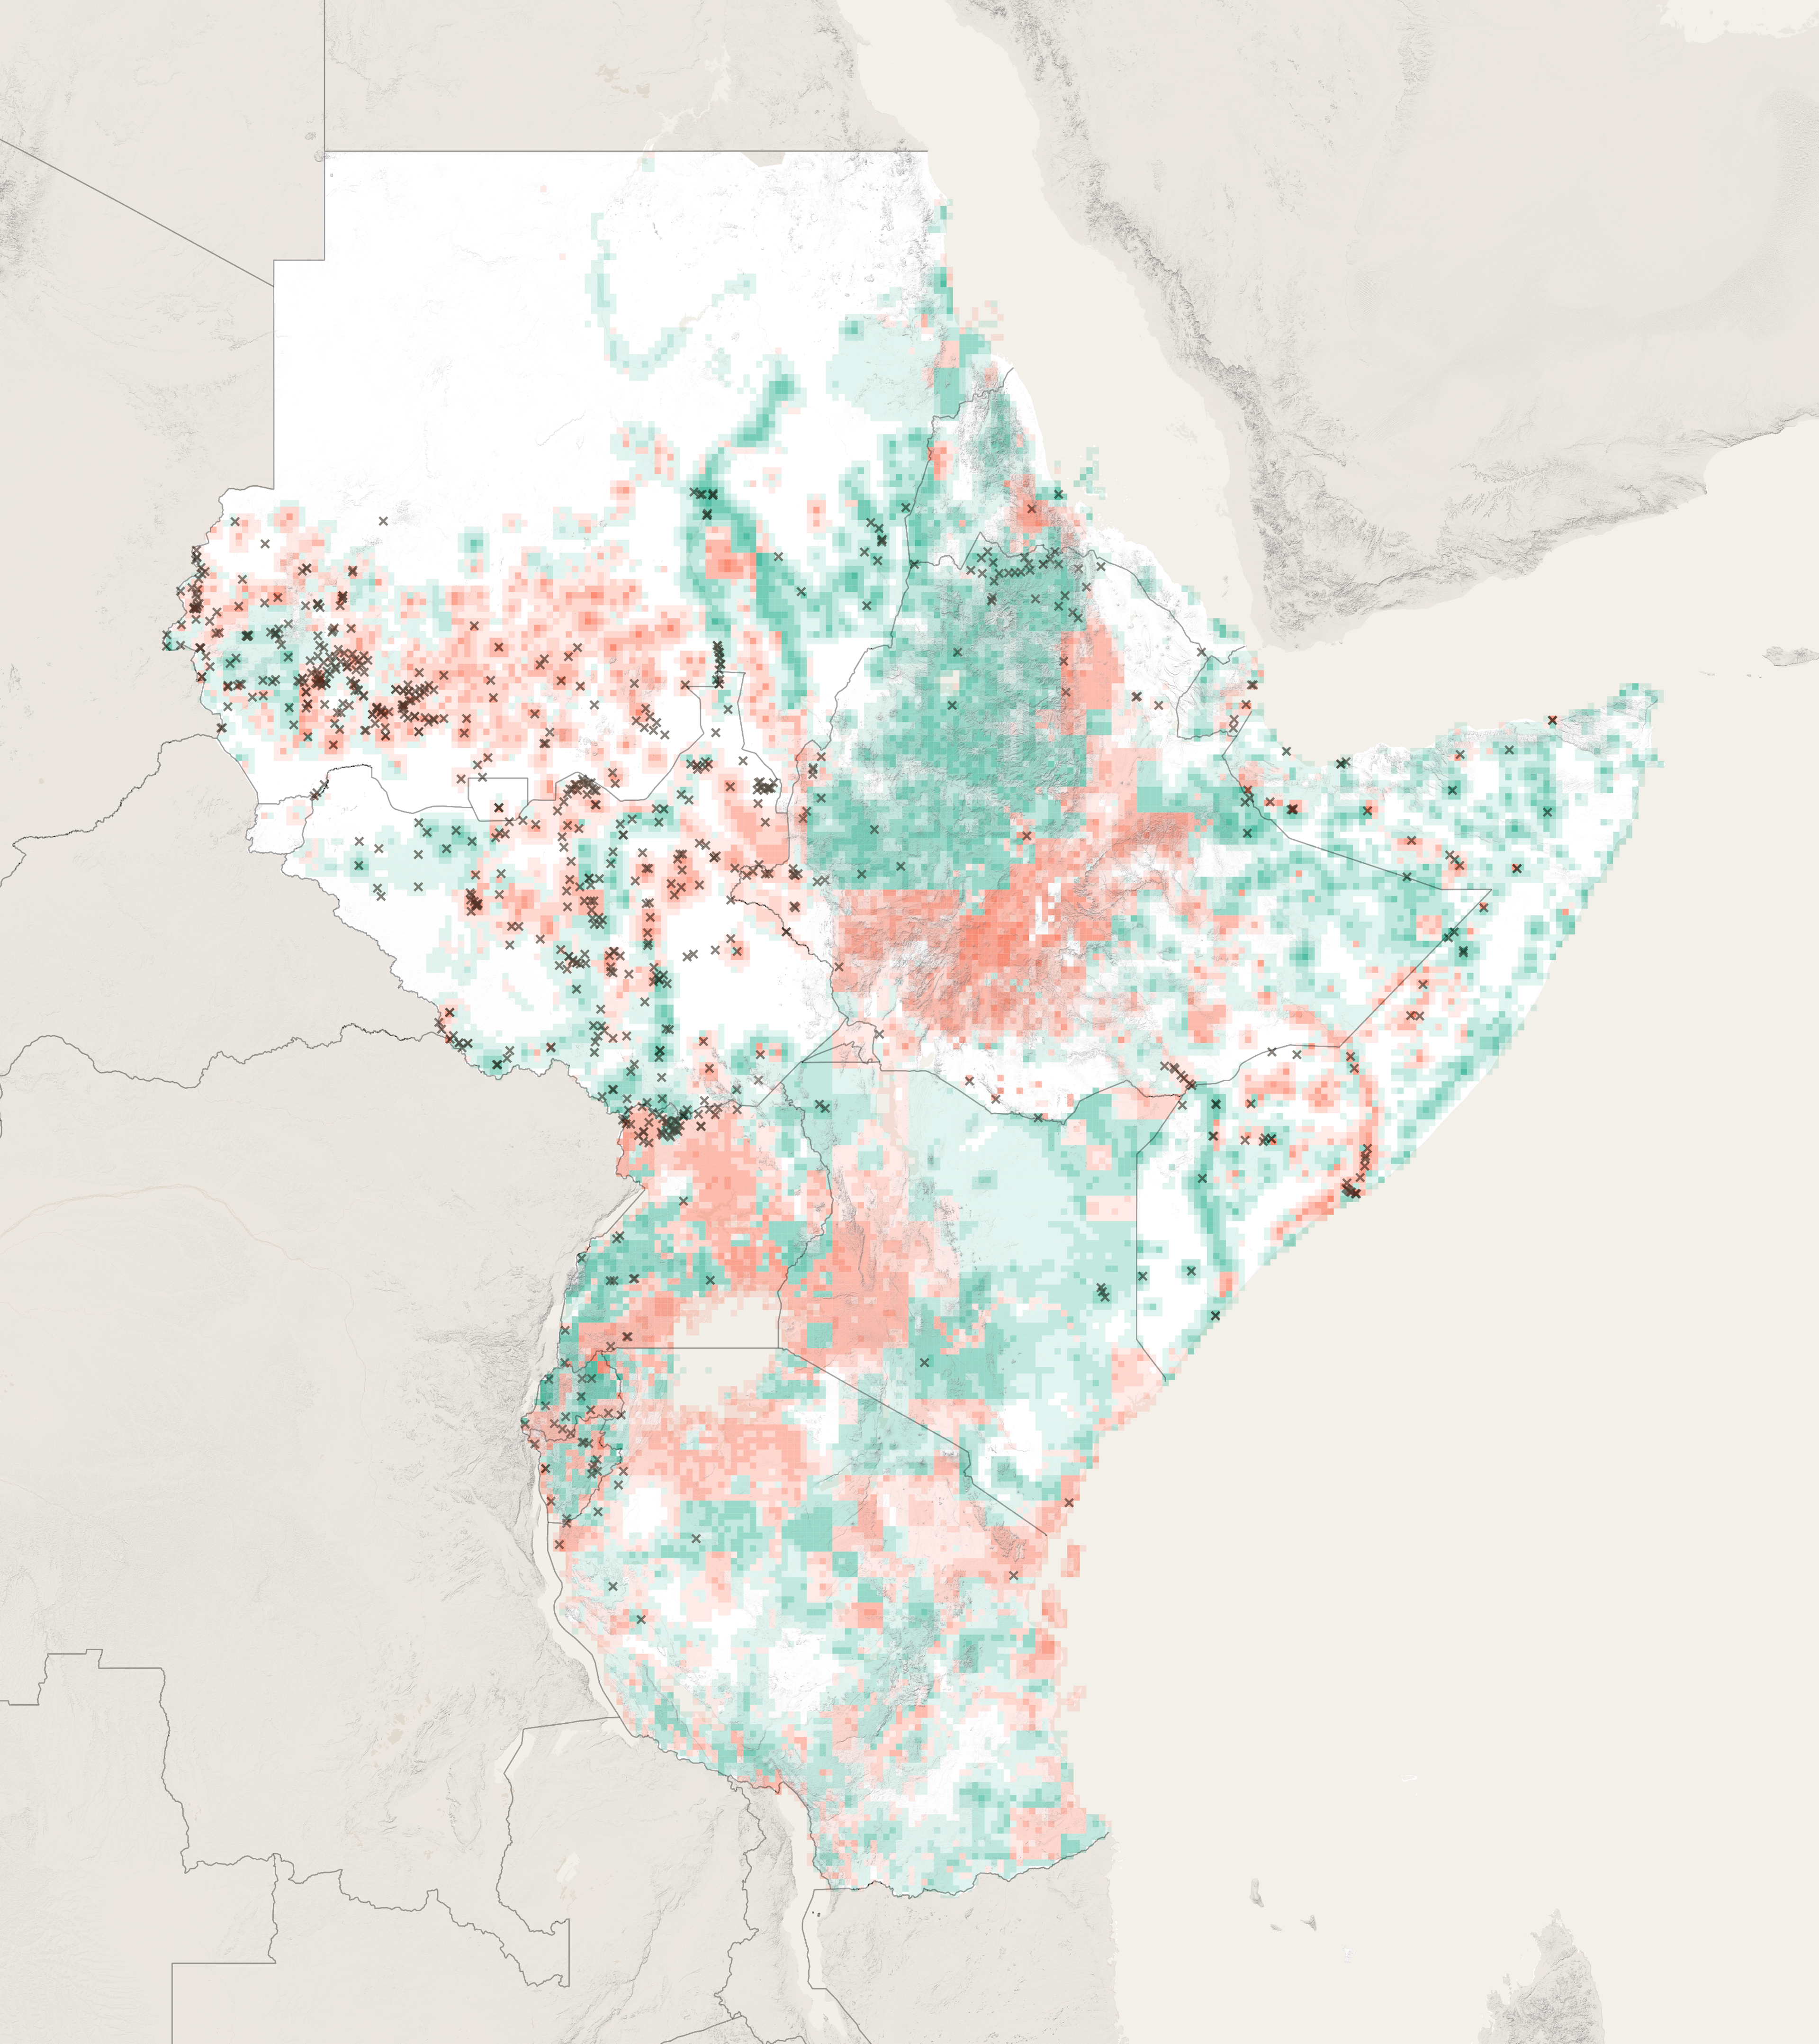 Borderland areas in East Africa that already see large-scale displacement are forecast to be hotspots for climate mobility in the future.